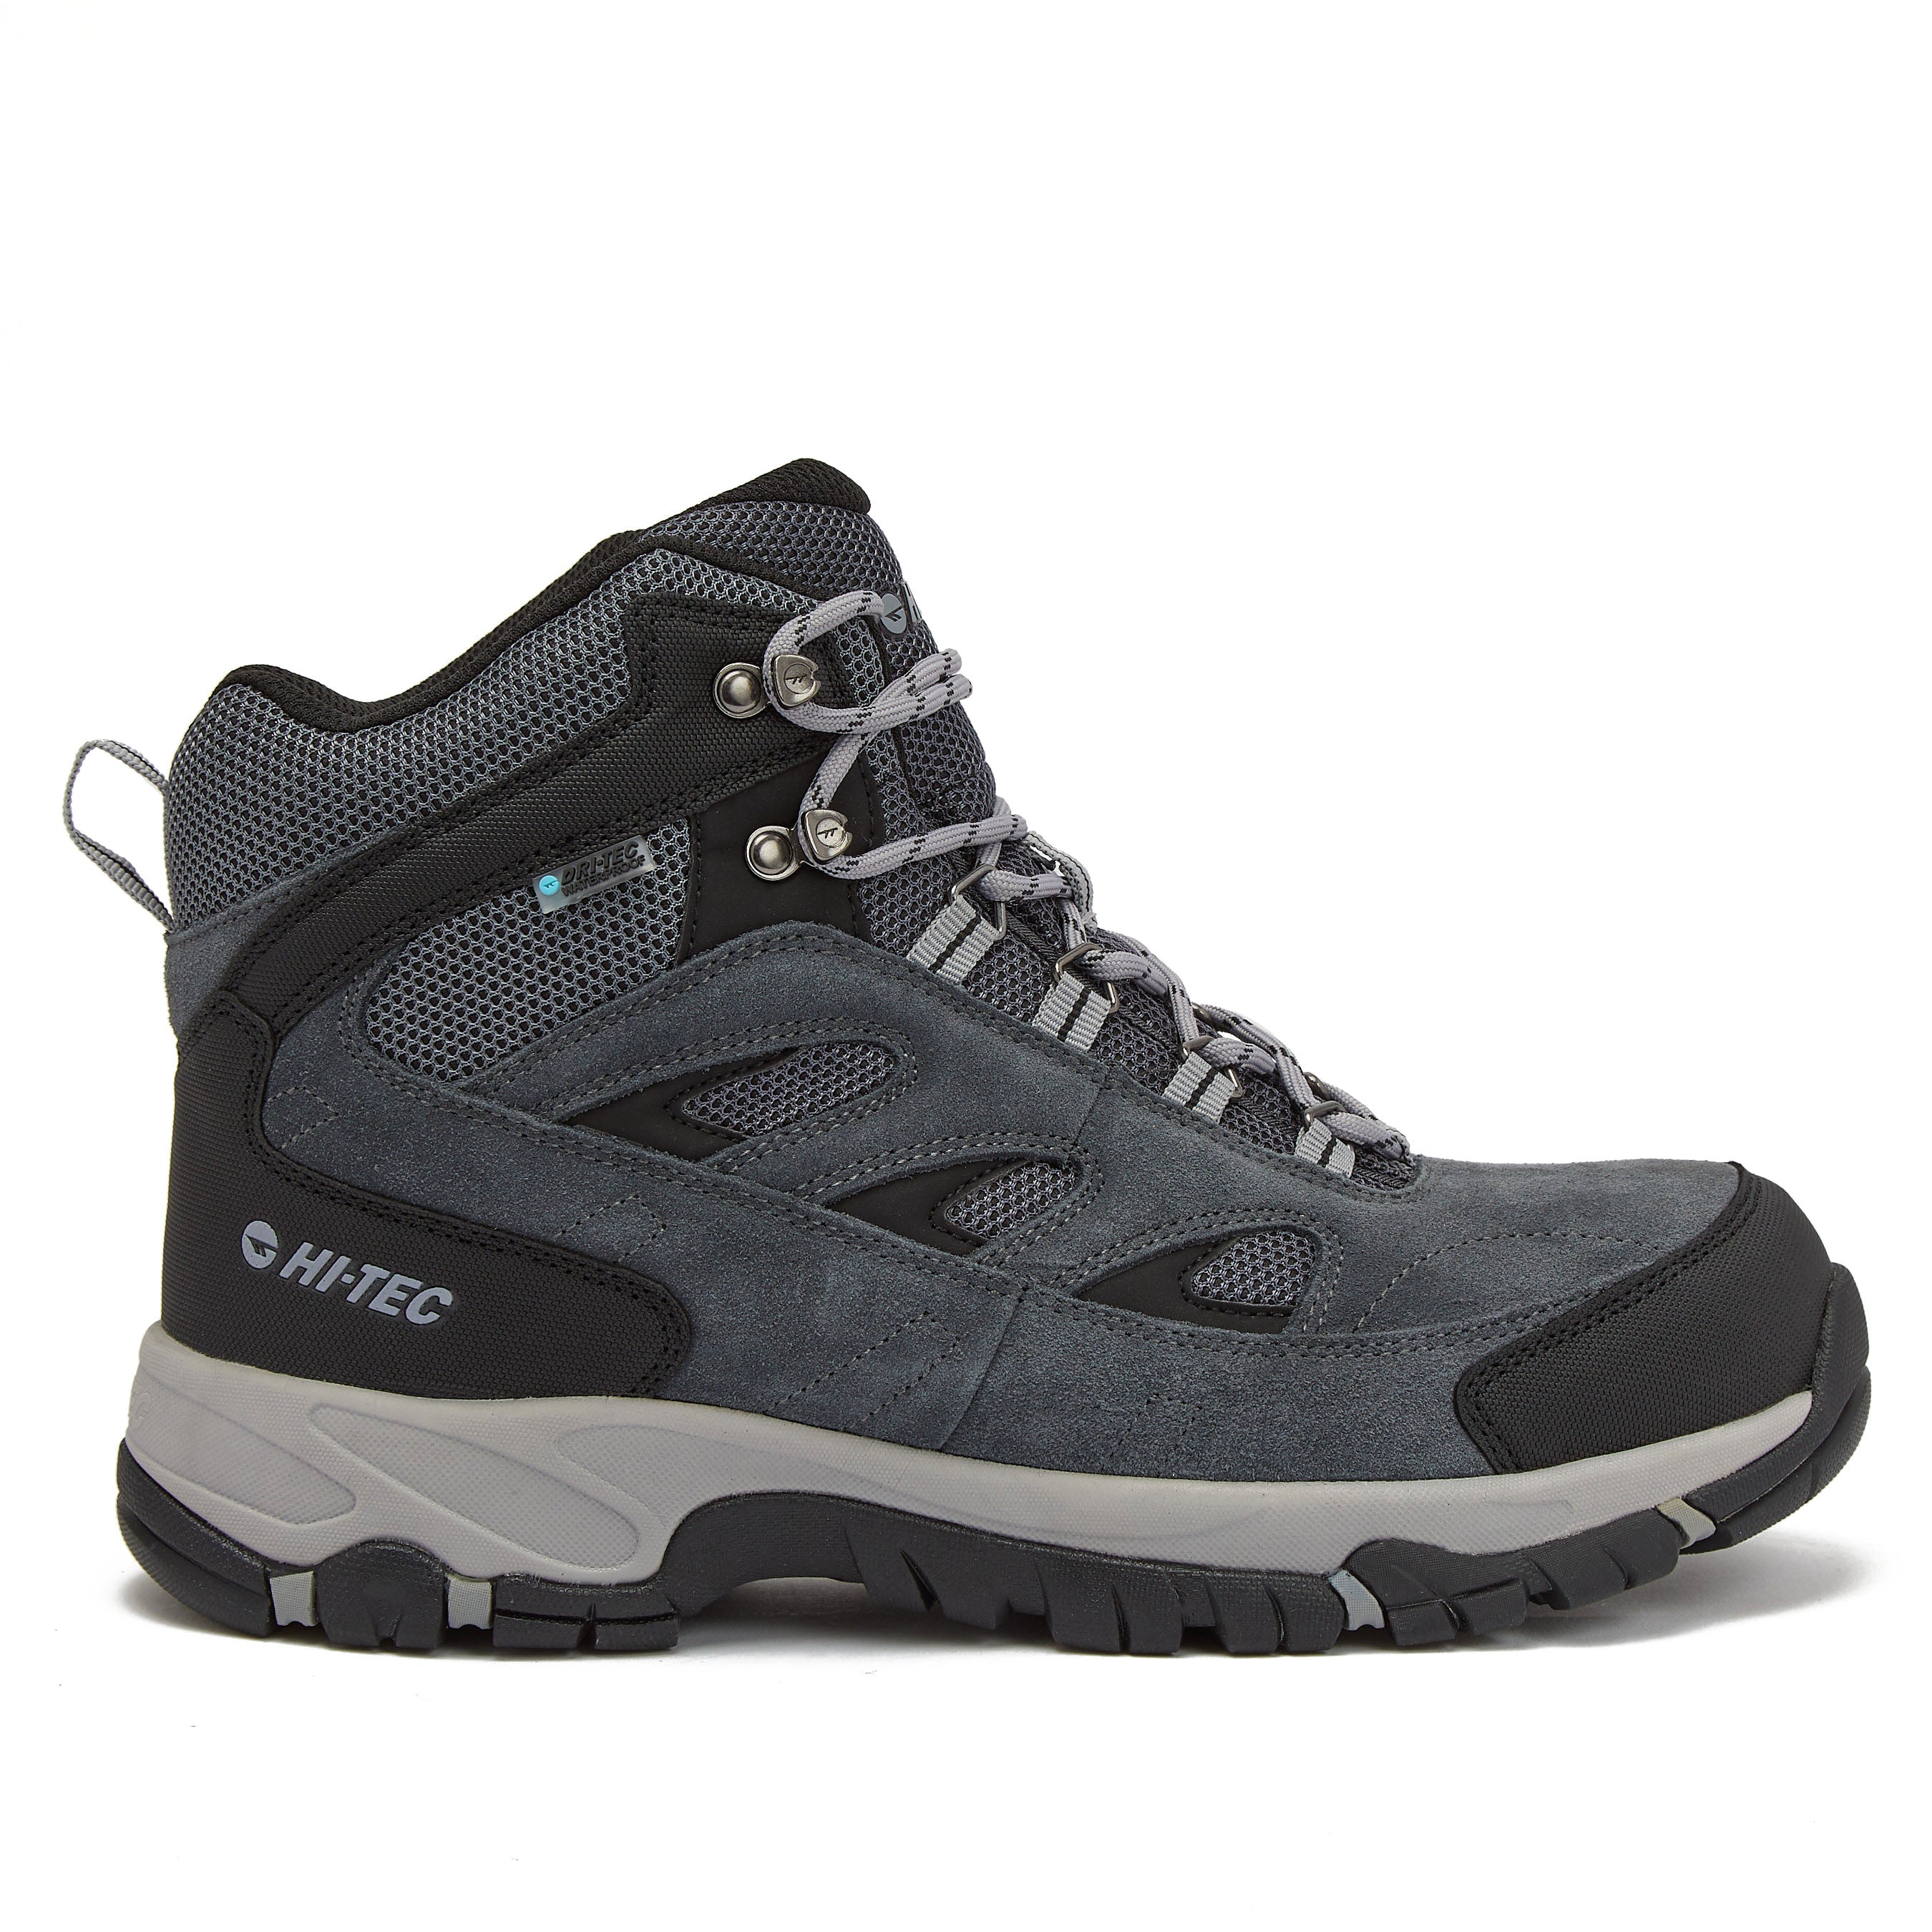 Shoes Men Hiking & for – Hi-Tec Women Boots and Trail